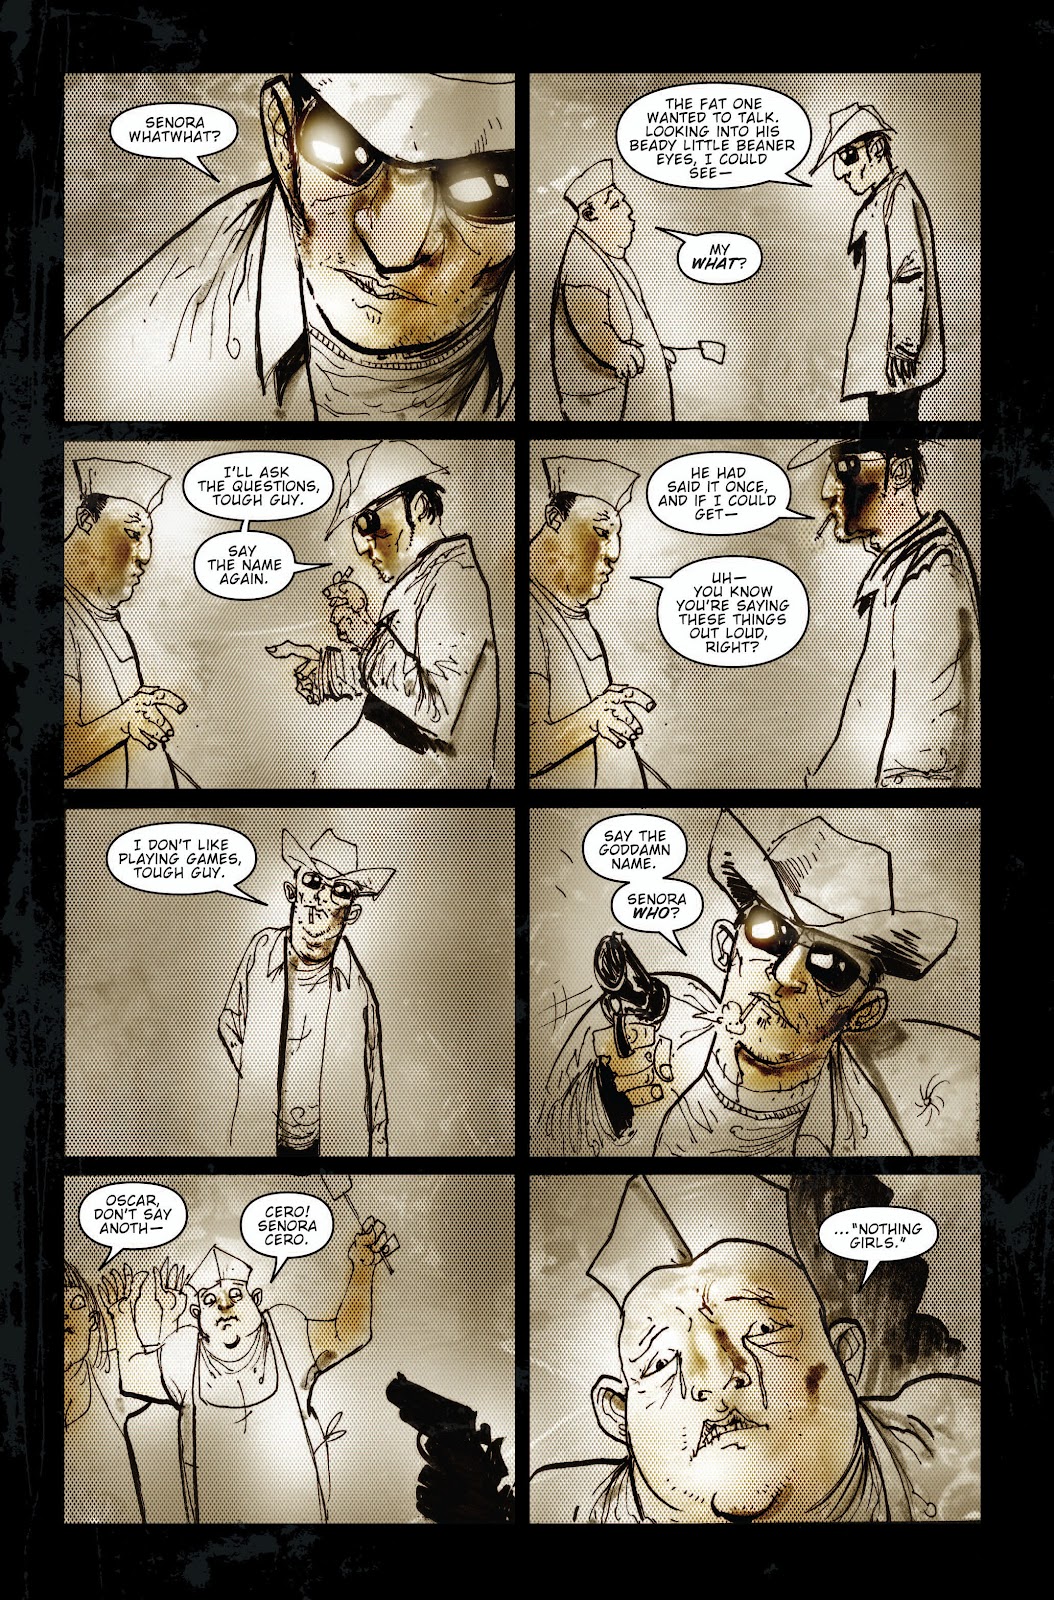 30 Days of Night: Bloodsucker Tales issue 1 - Page 20